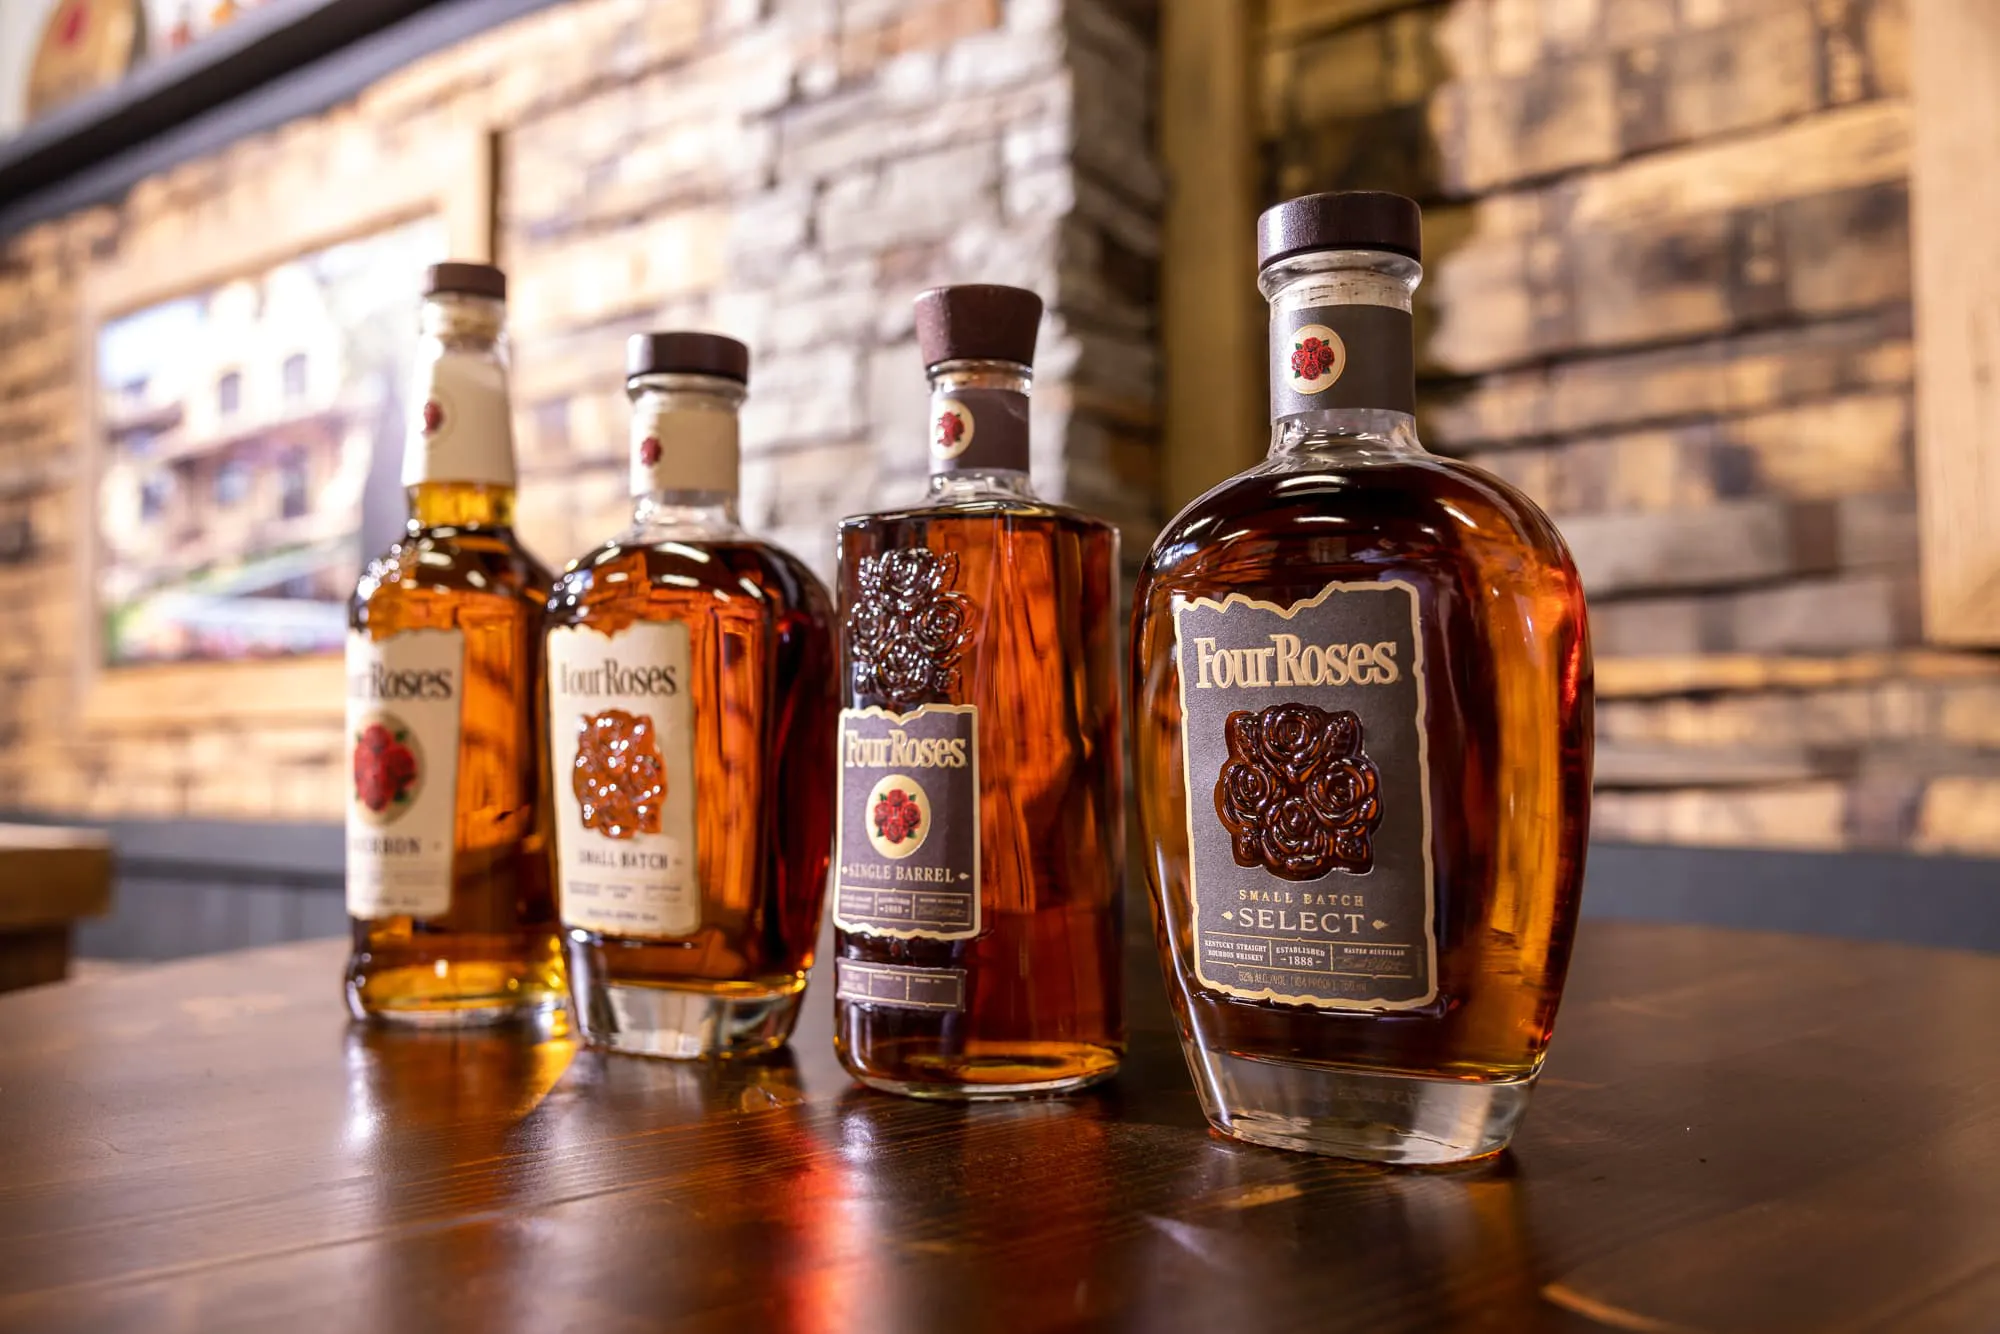 FOUR ROSES BOURBON FOOD AND DRINK EVENT CHICAGO